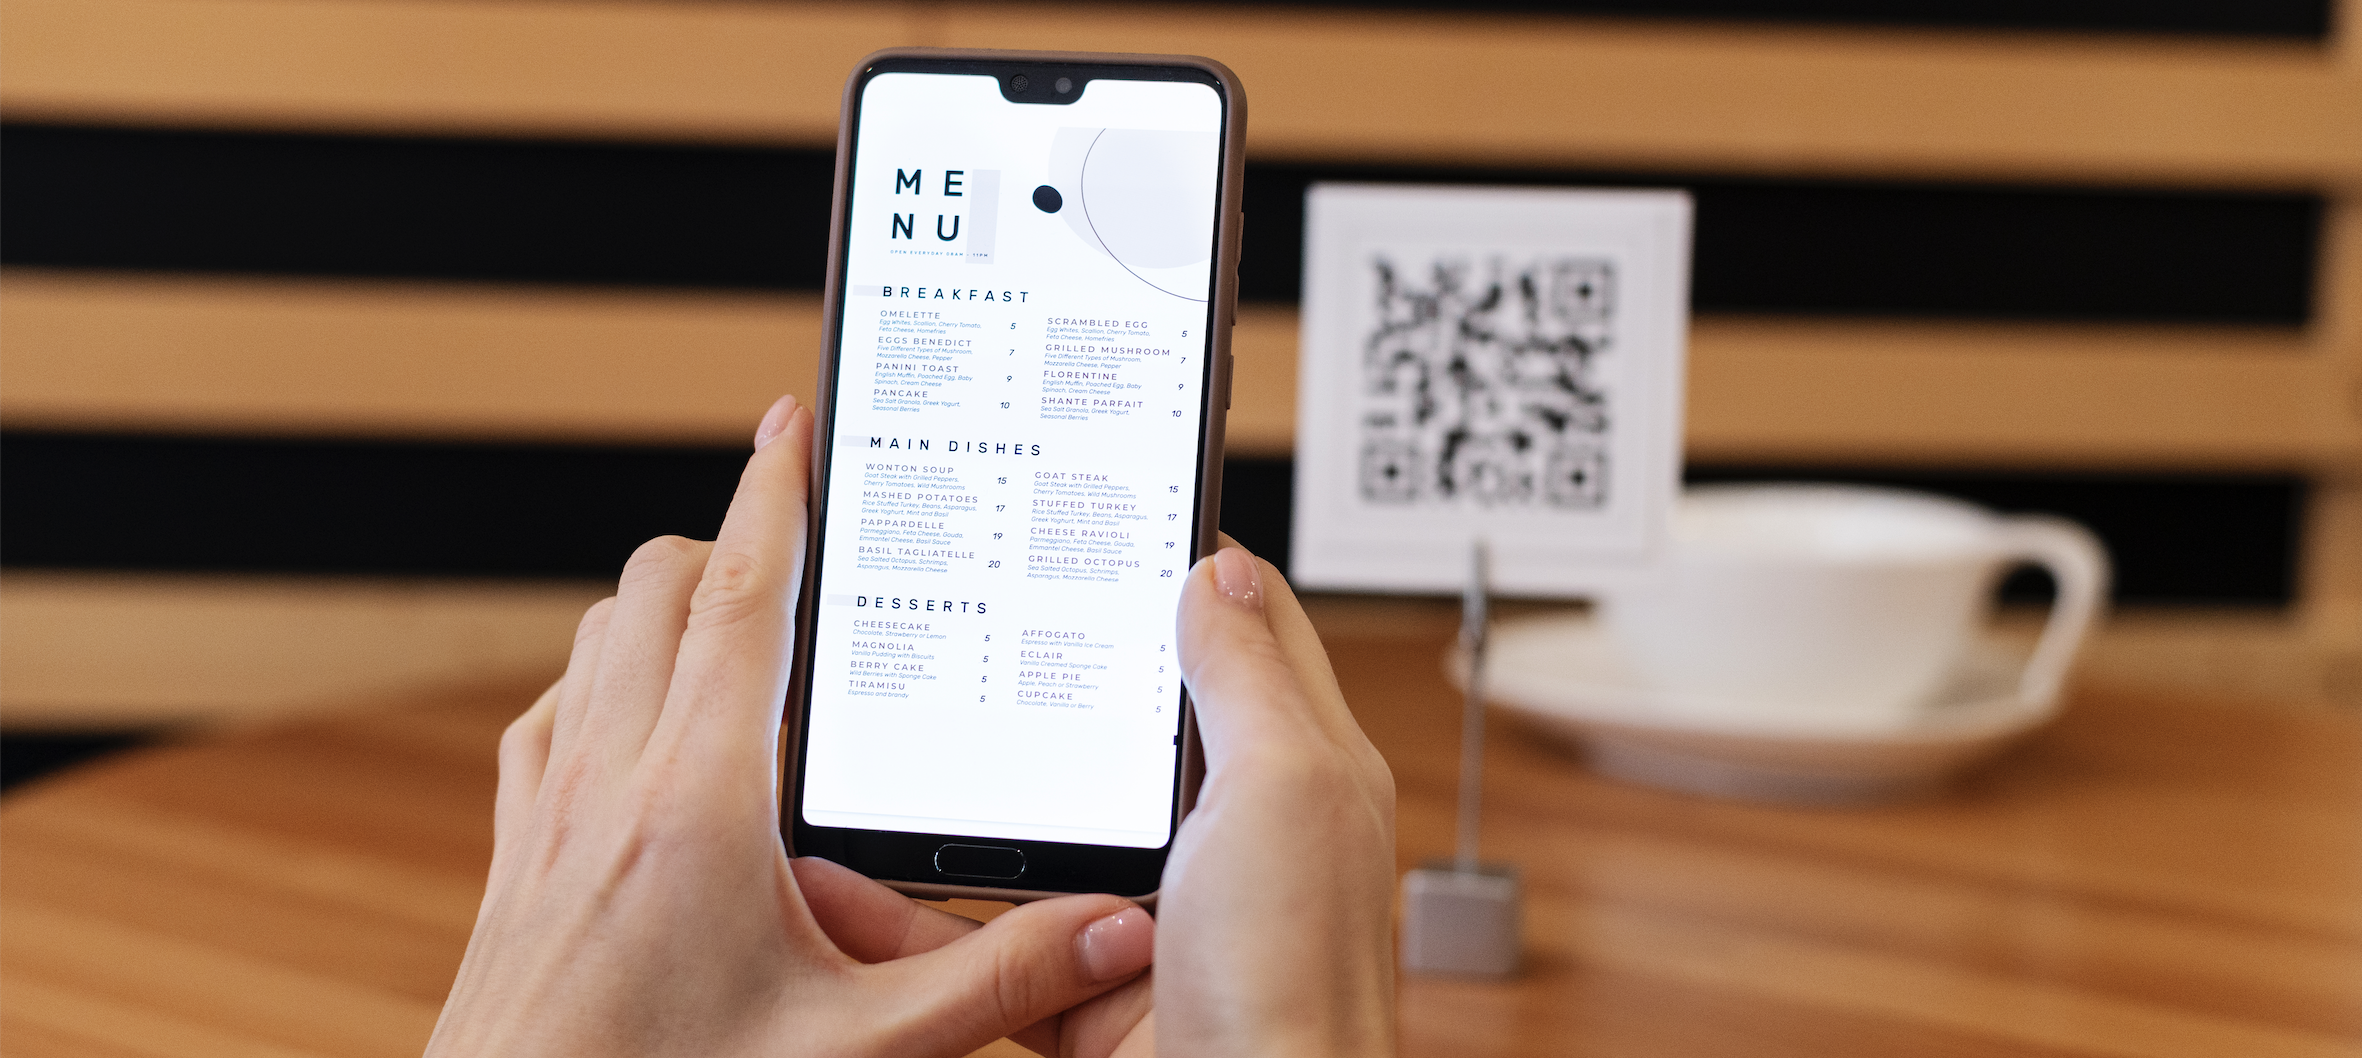 Why BYOD QR Codes are Replacing Restaurant Menus